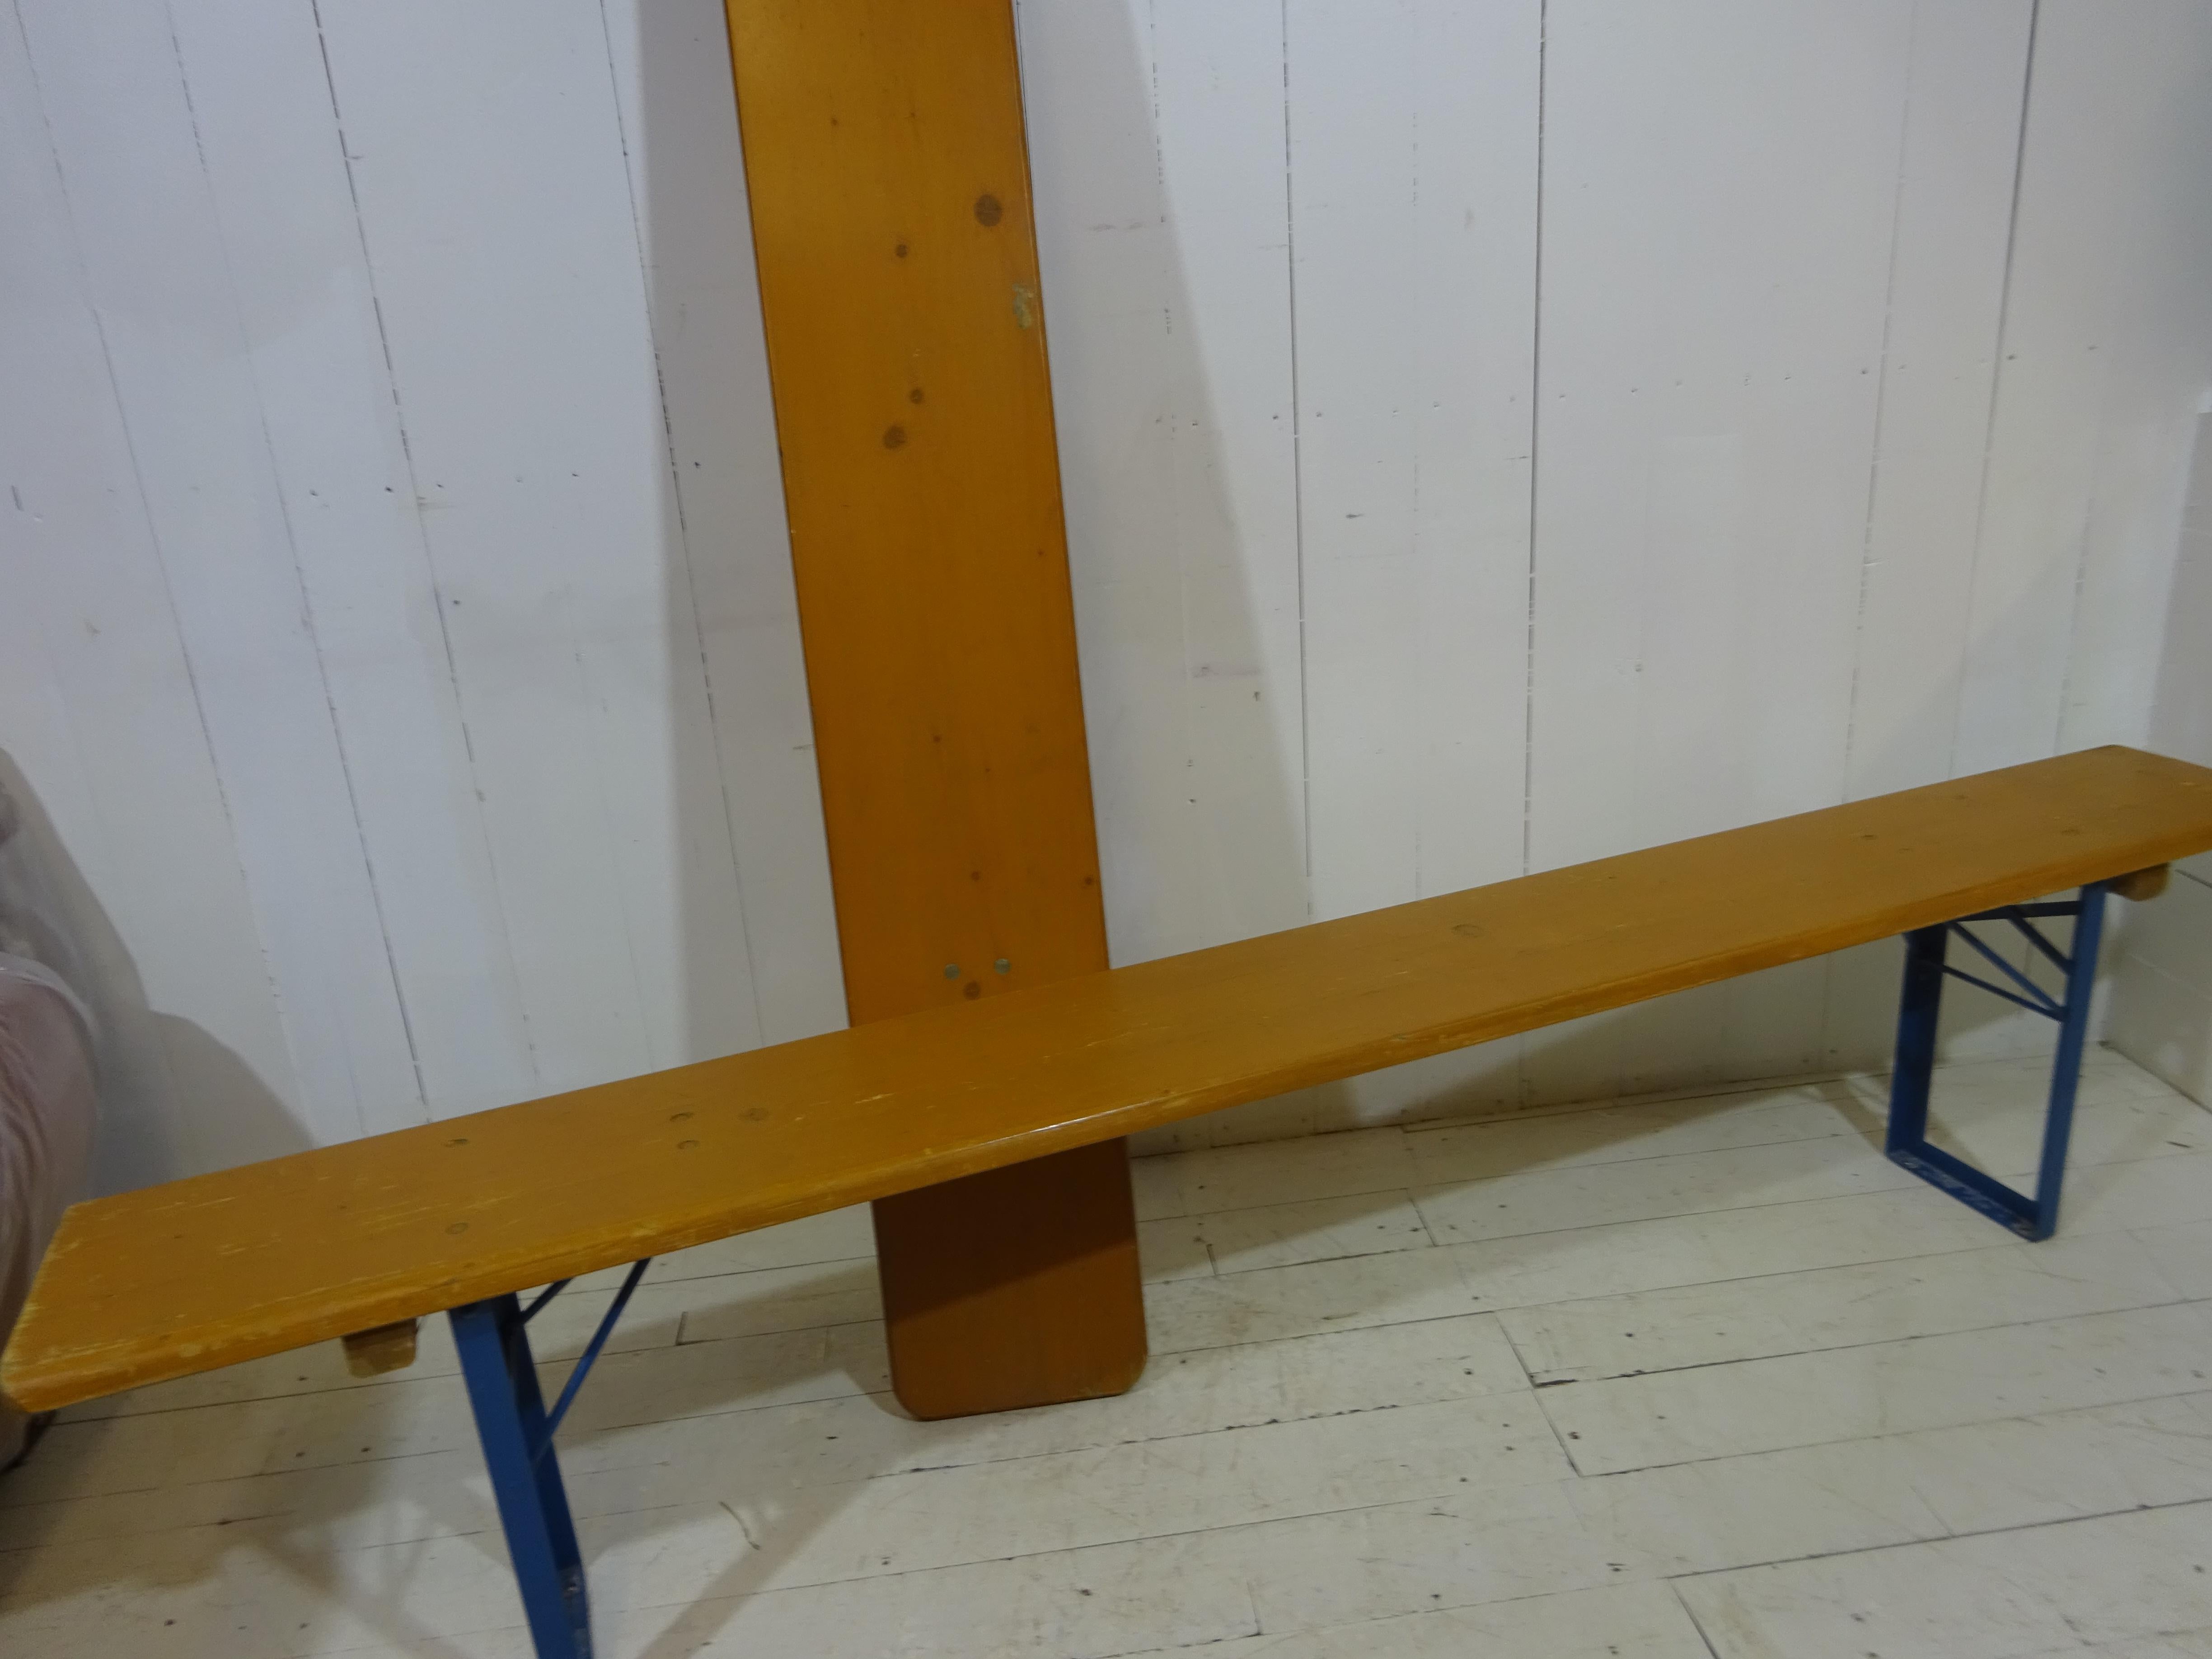 Late 20th Century German Retro Folding Brewery Bench For Sale